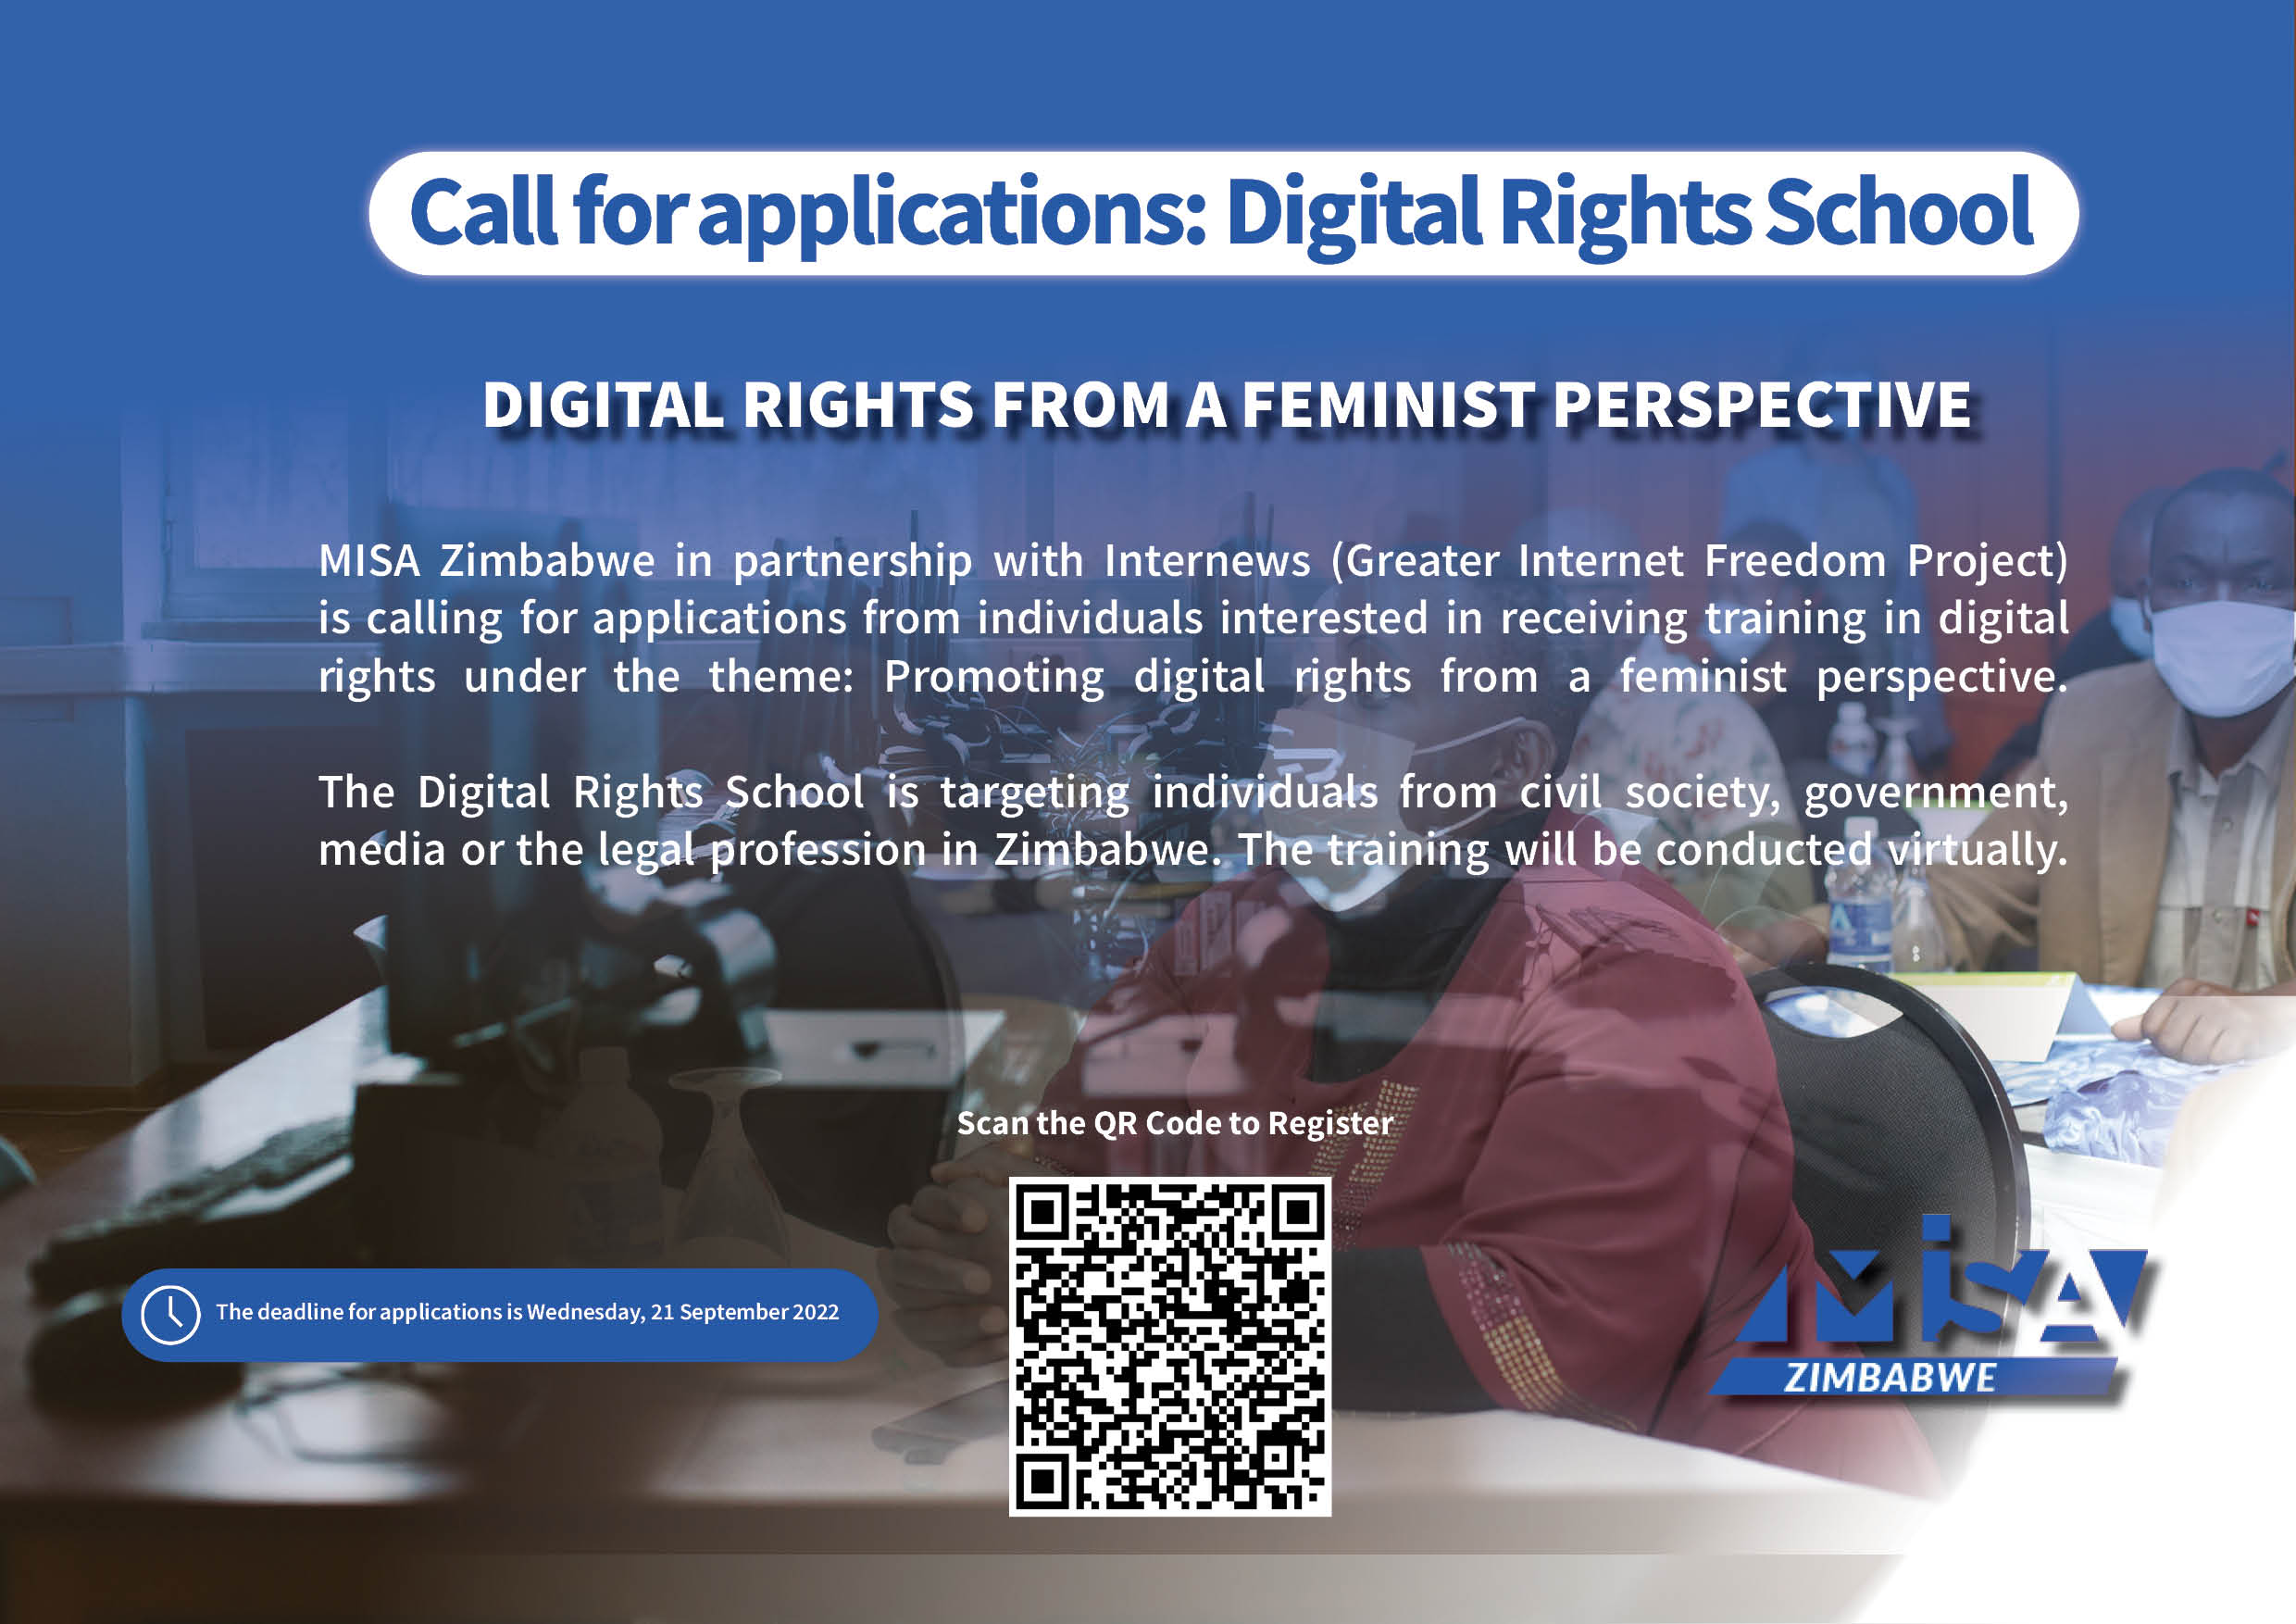 Digital Rights School: Digital rights from a feminist perspective